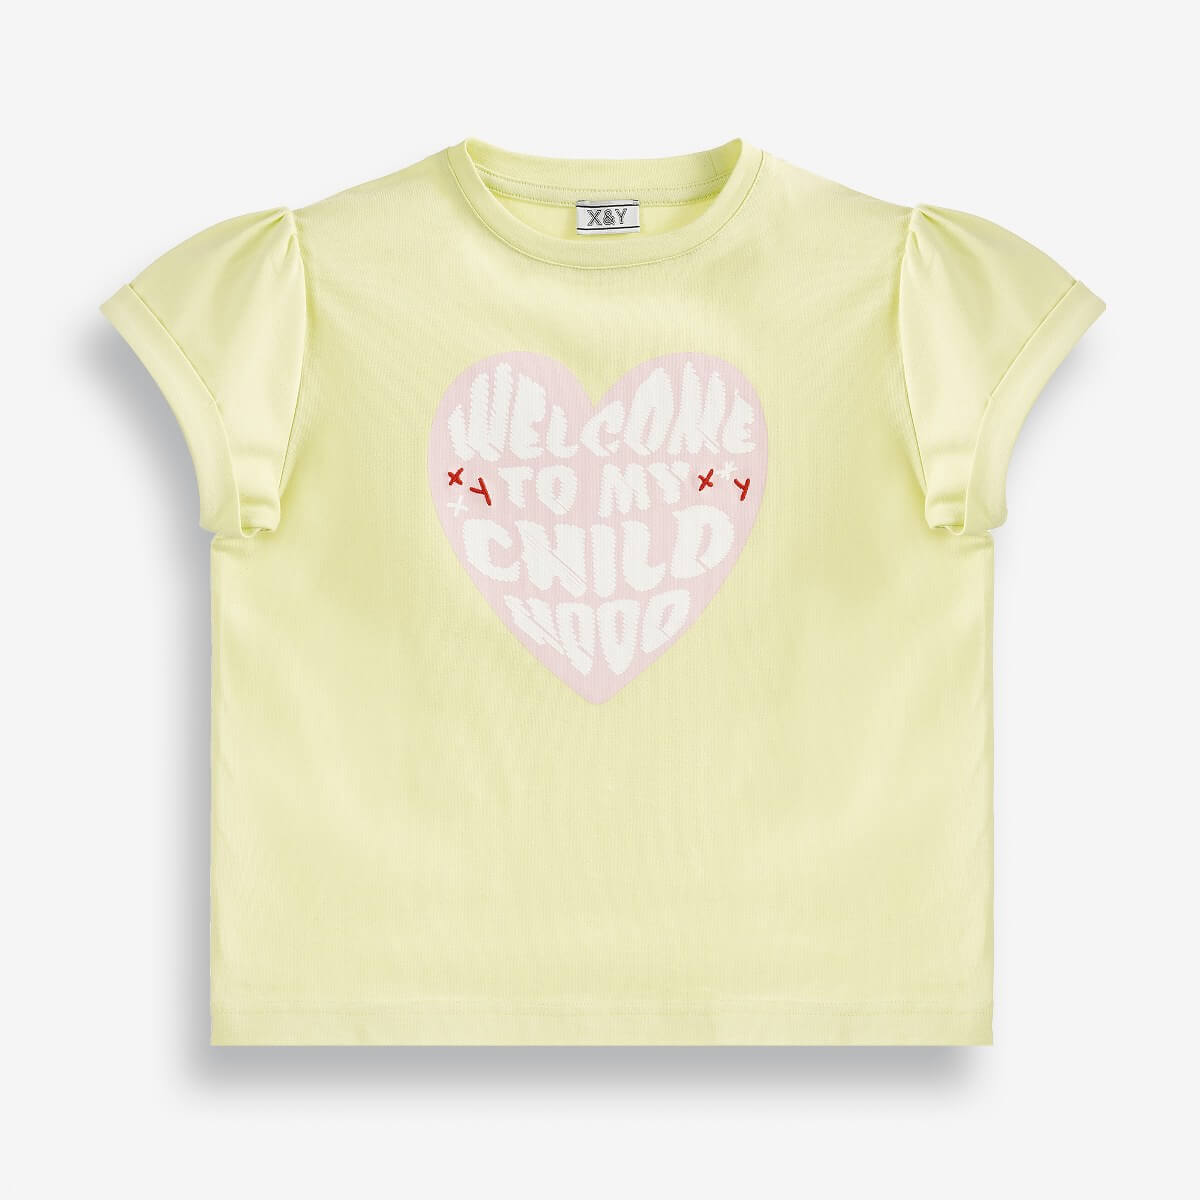 Girls' Graphic T-Shirt with a Statement Print on the Front